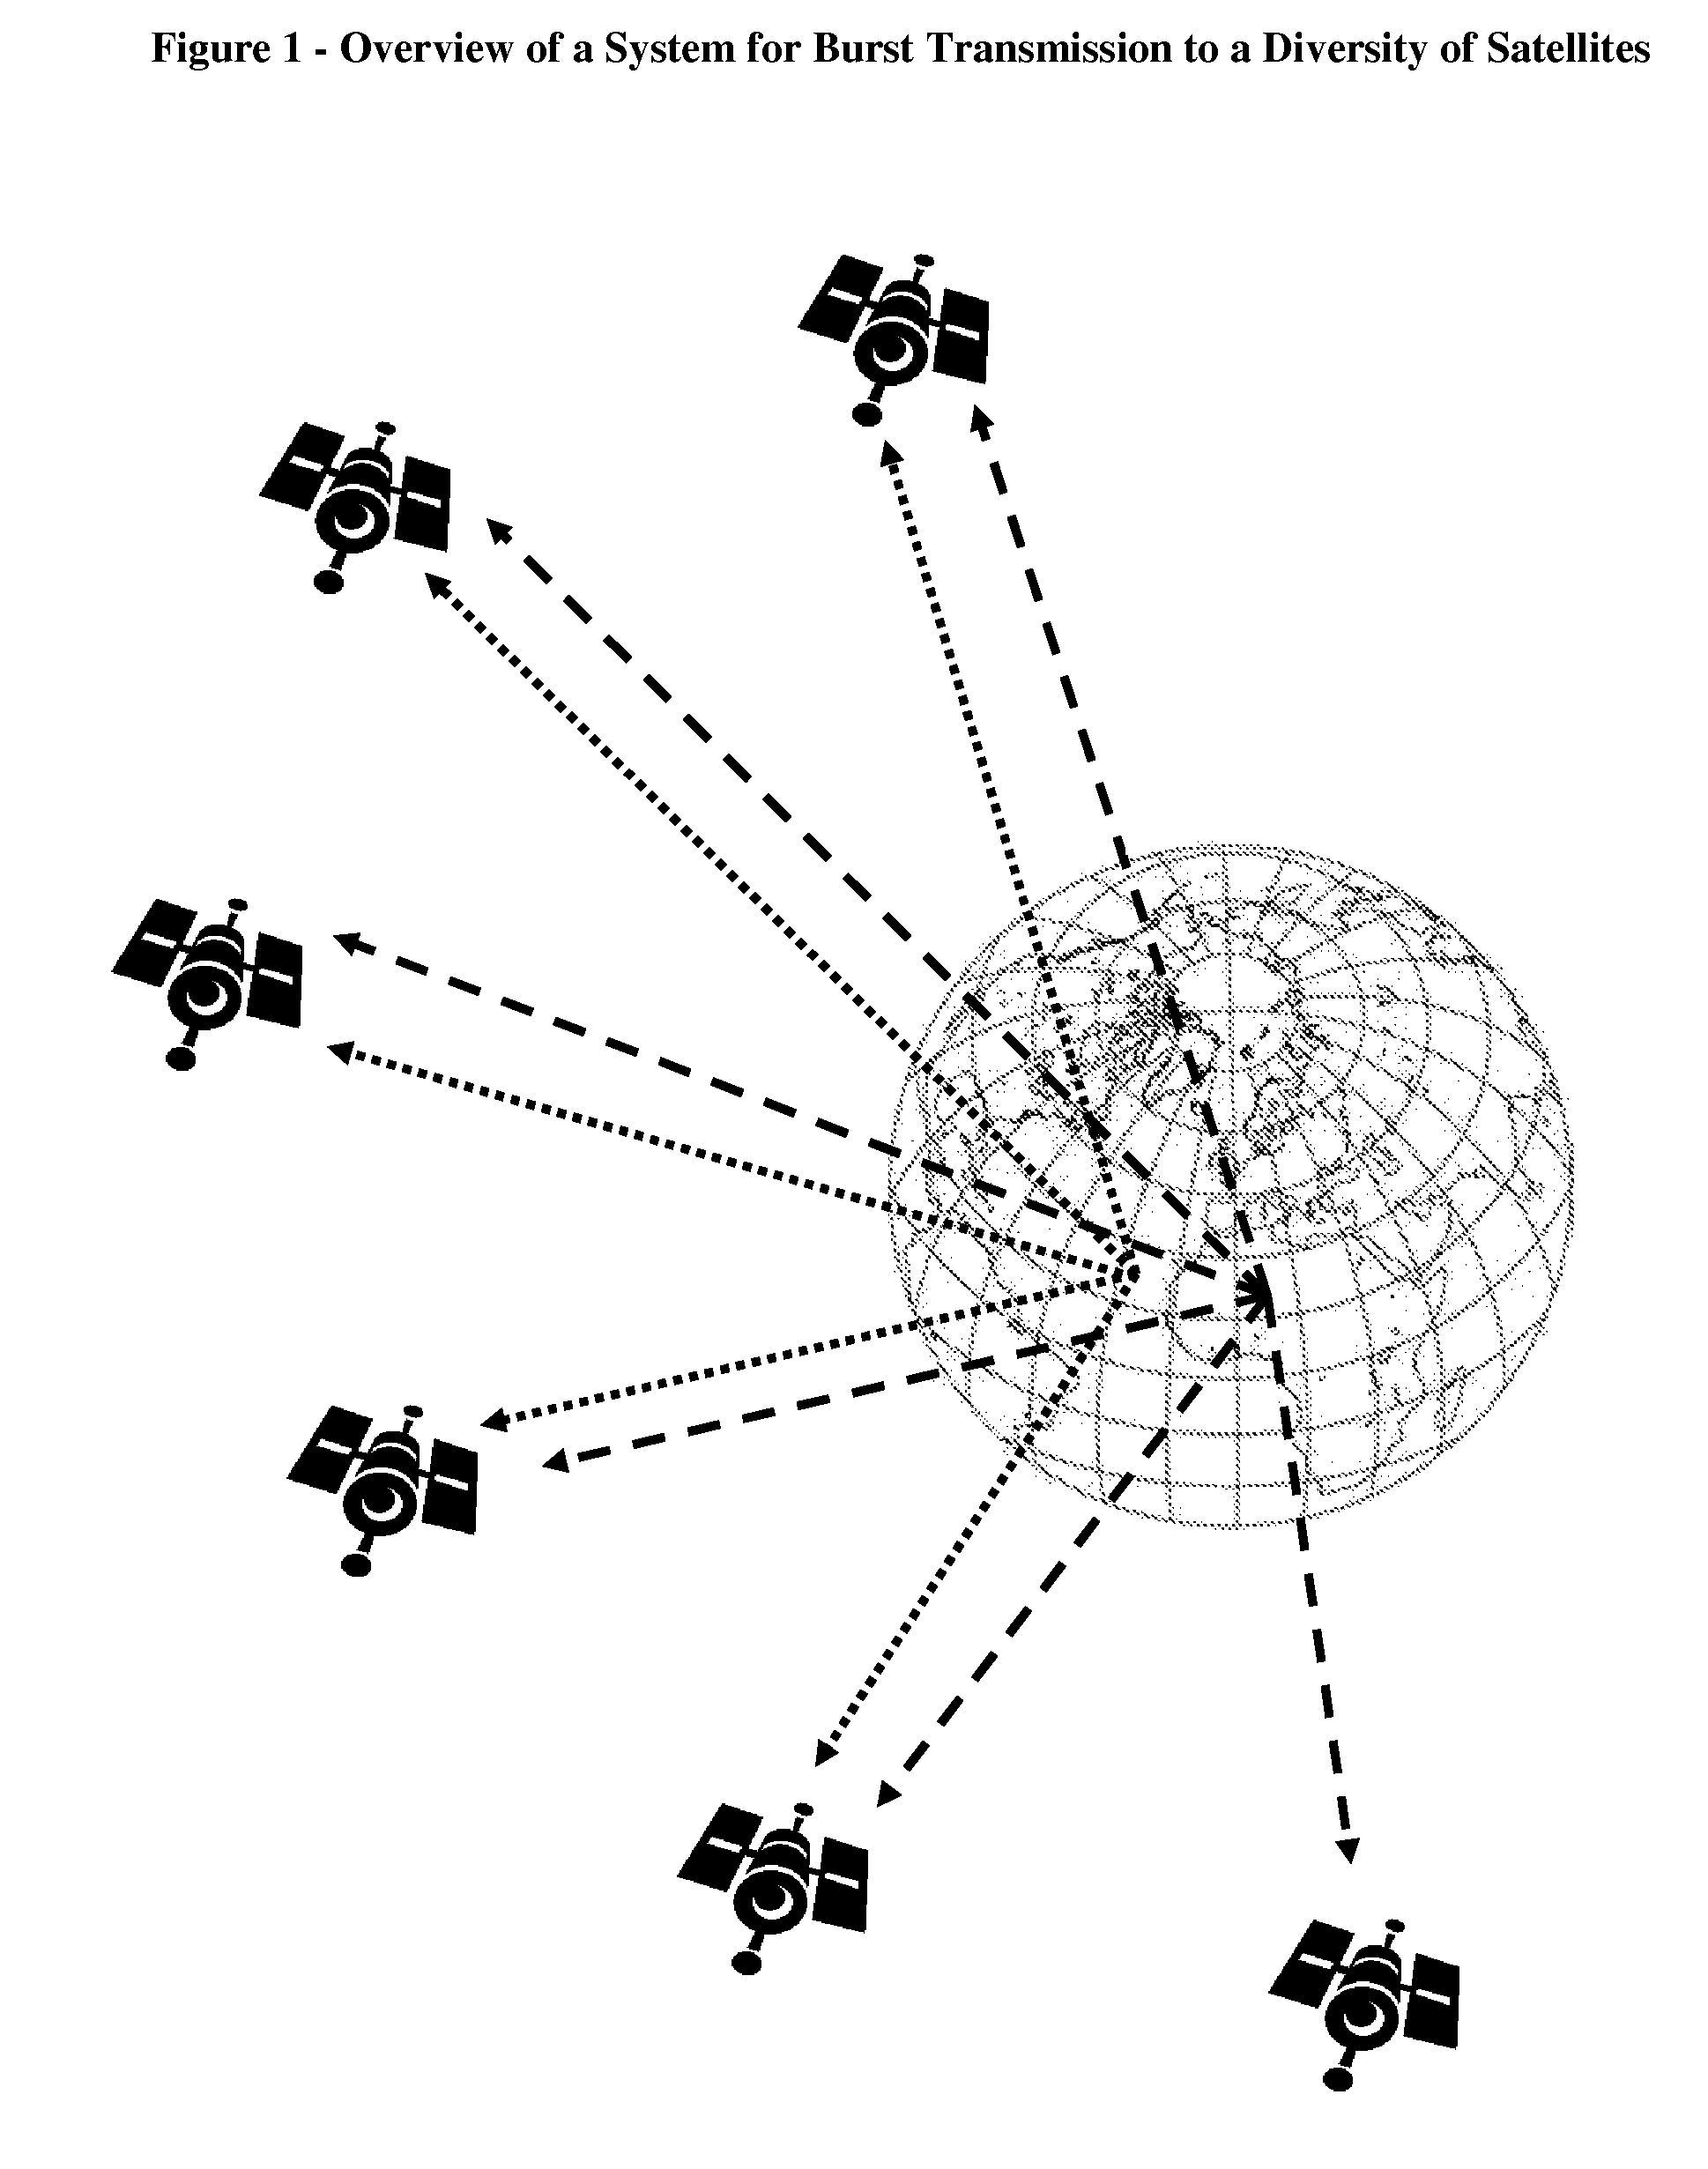 Channel allocation for burst transmission to a diversity of satellites